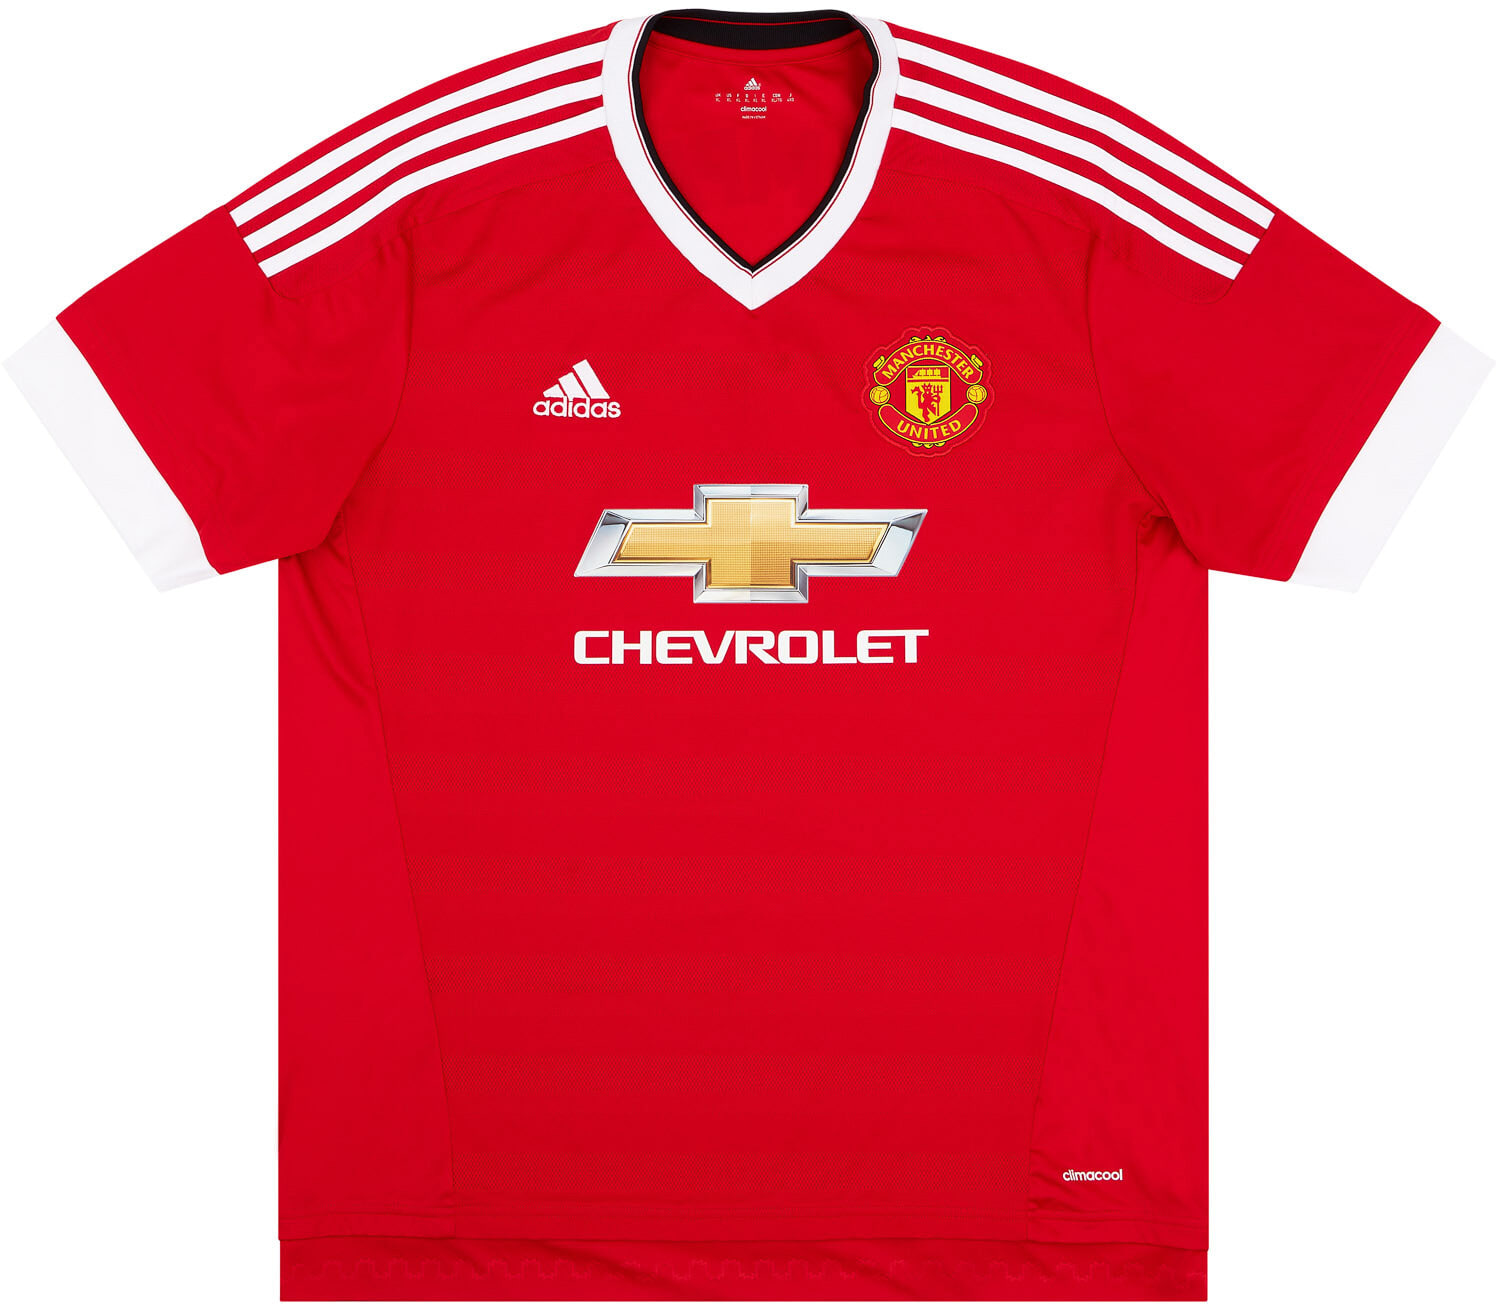 2015-16 Manchester United Home Shirt - 8/10 - ()